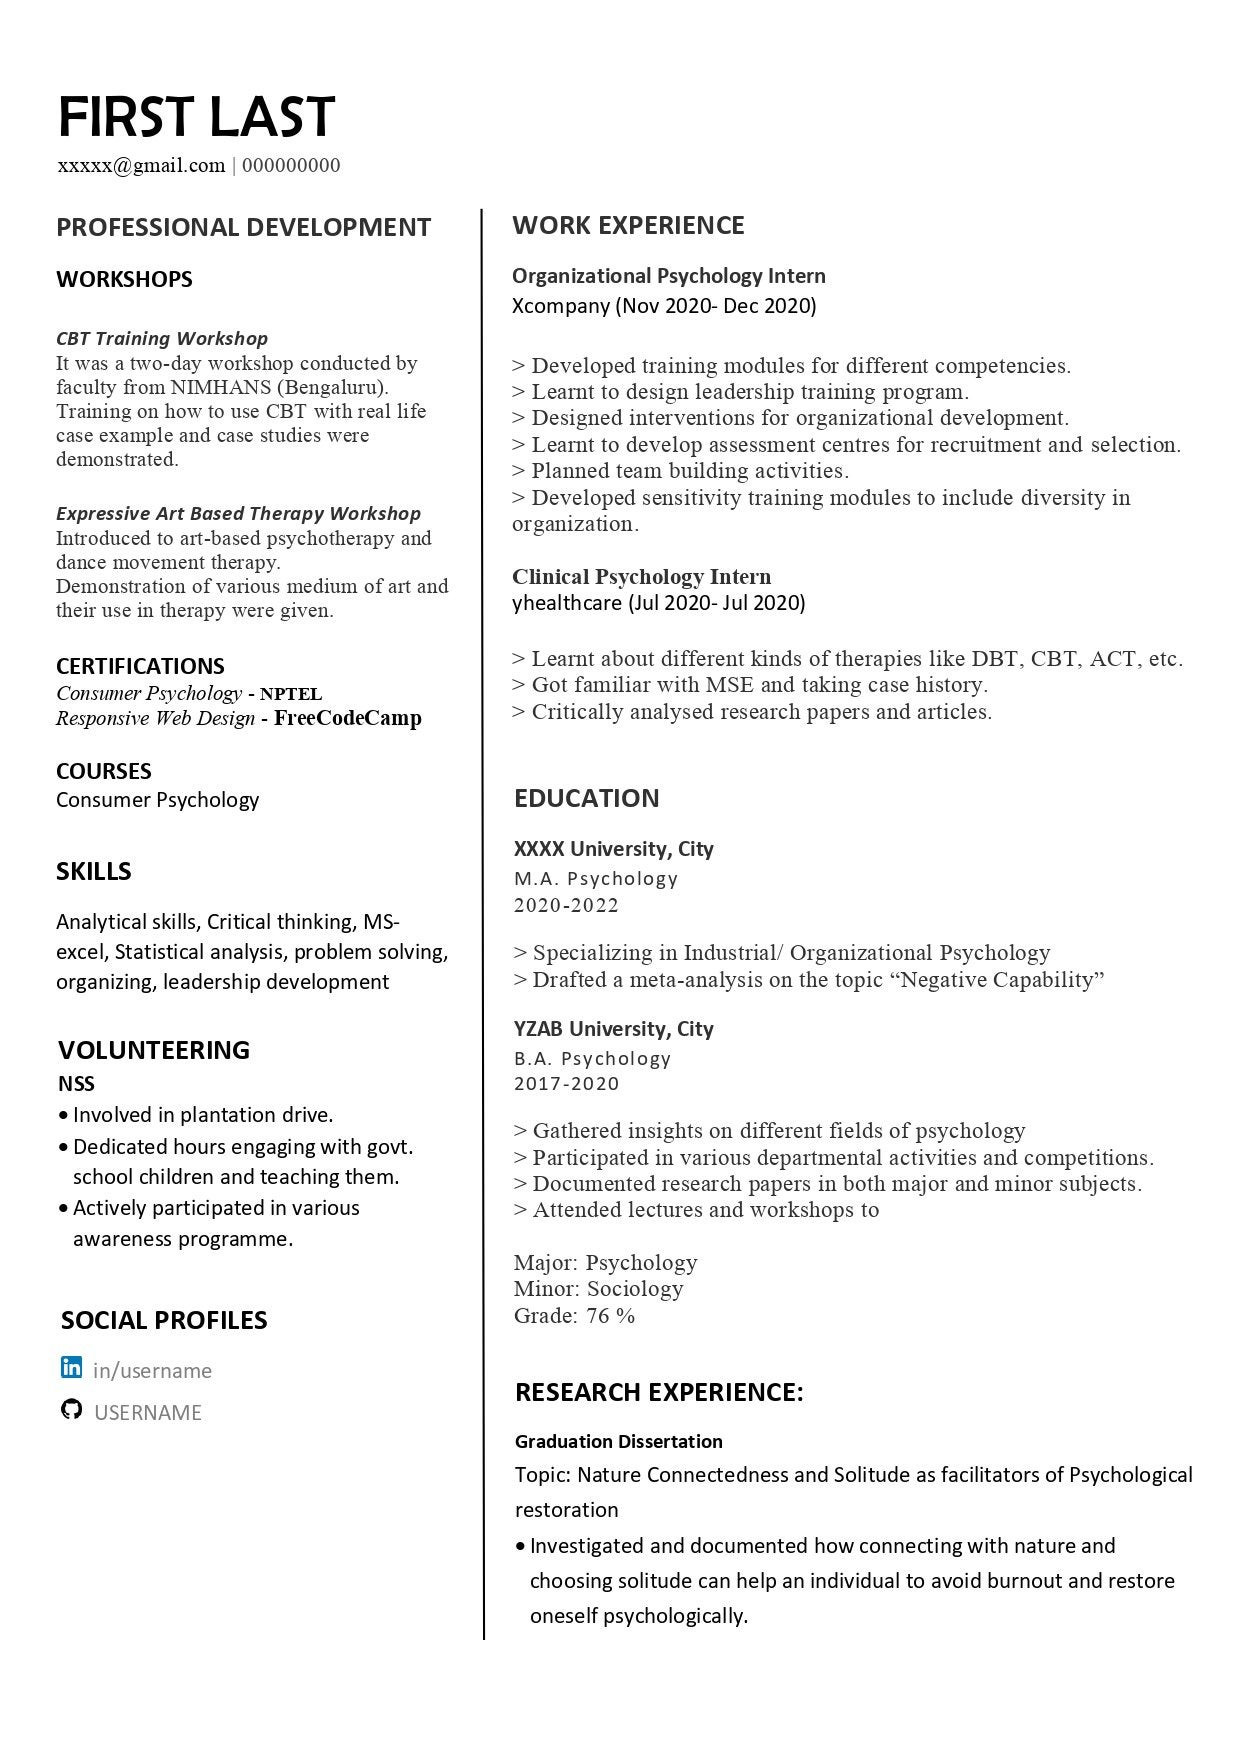 Sample Resume for Pychology Entry Level Please Review My Resume. I Am A Psychology Graduate, Pursuing …